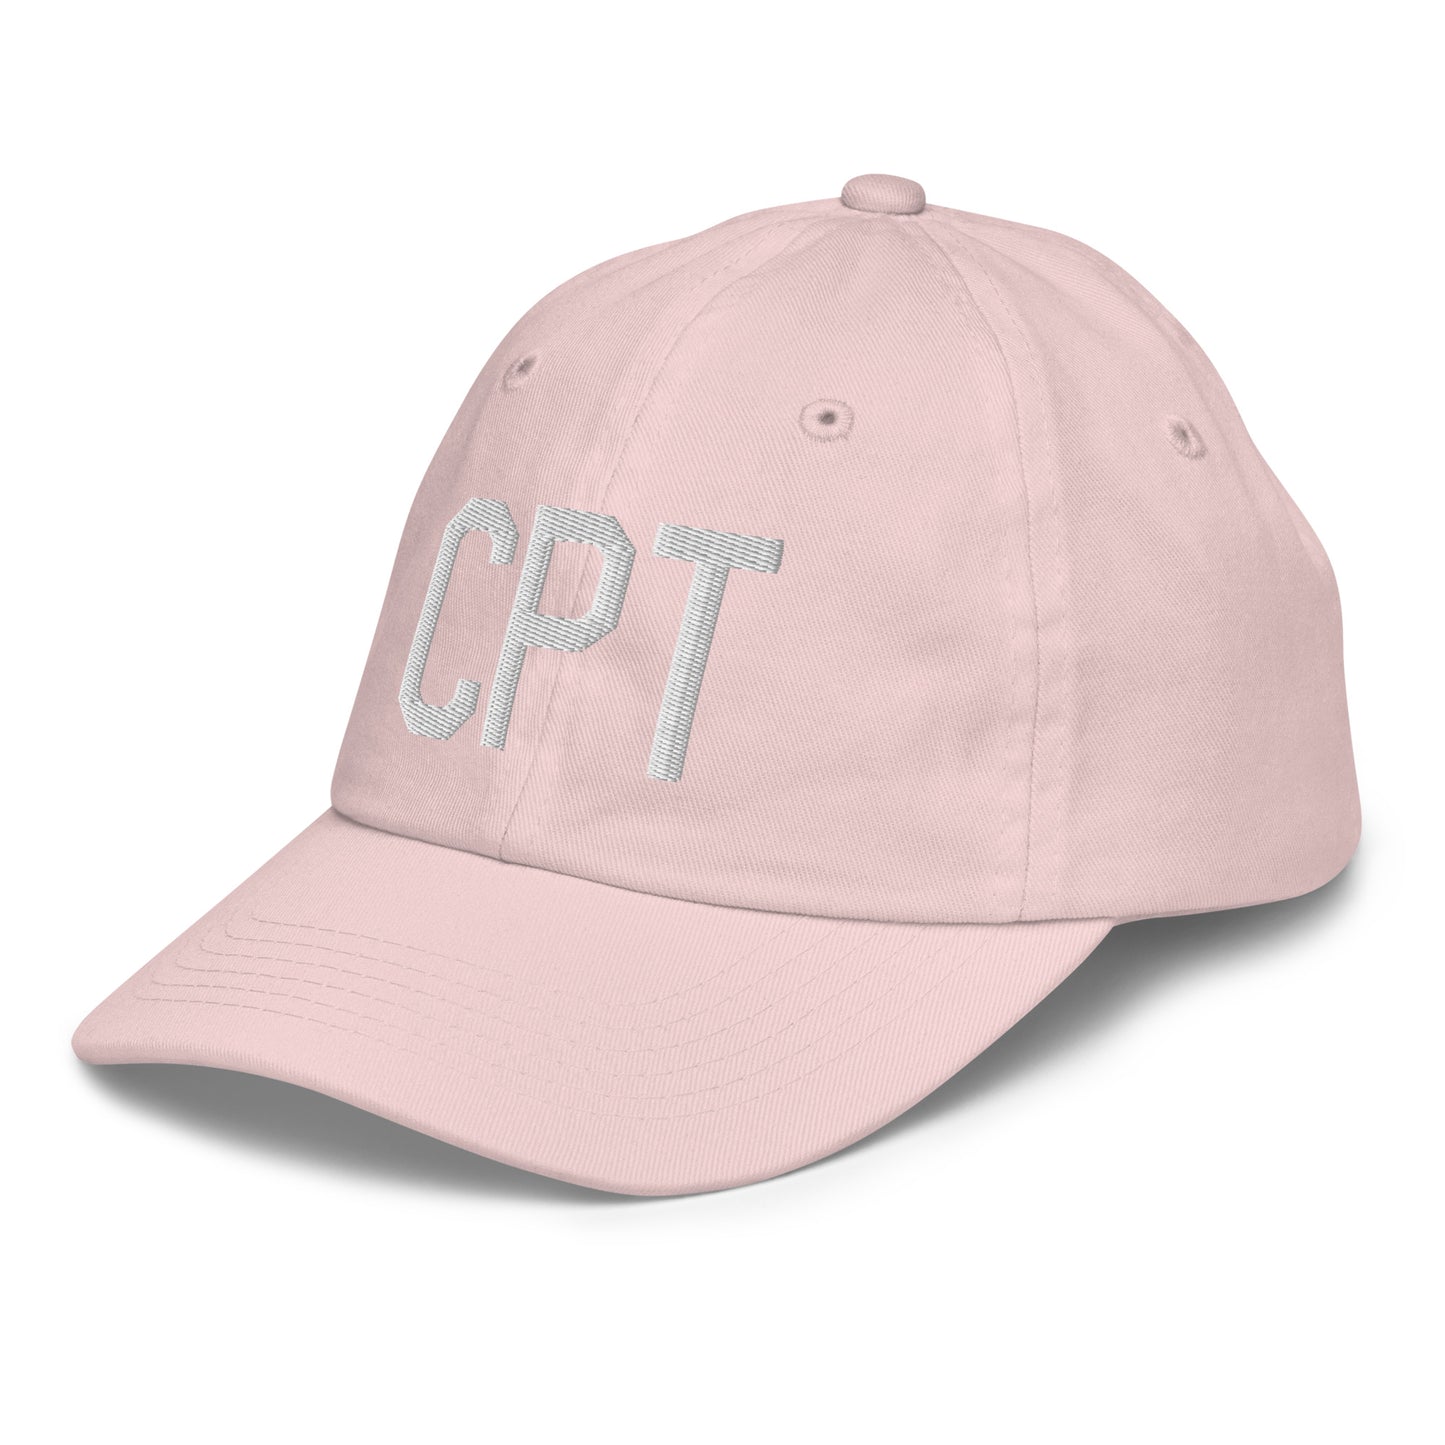 Airport Code Kid's Baseball Cap - White • CPT Cape Town • YHM Designs - Image 33